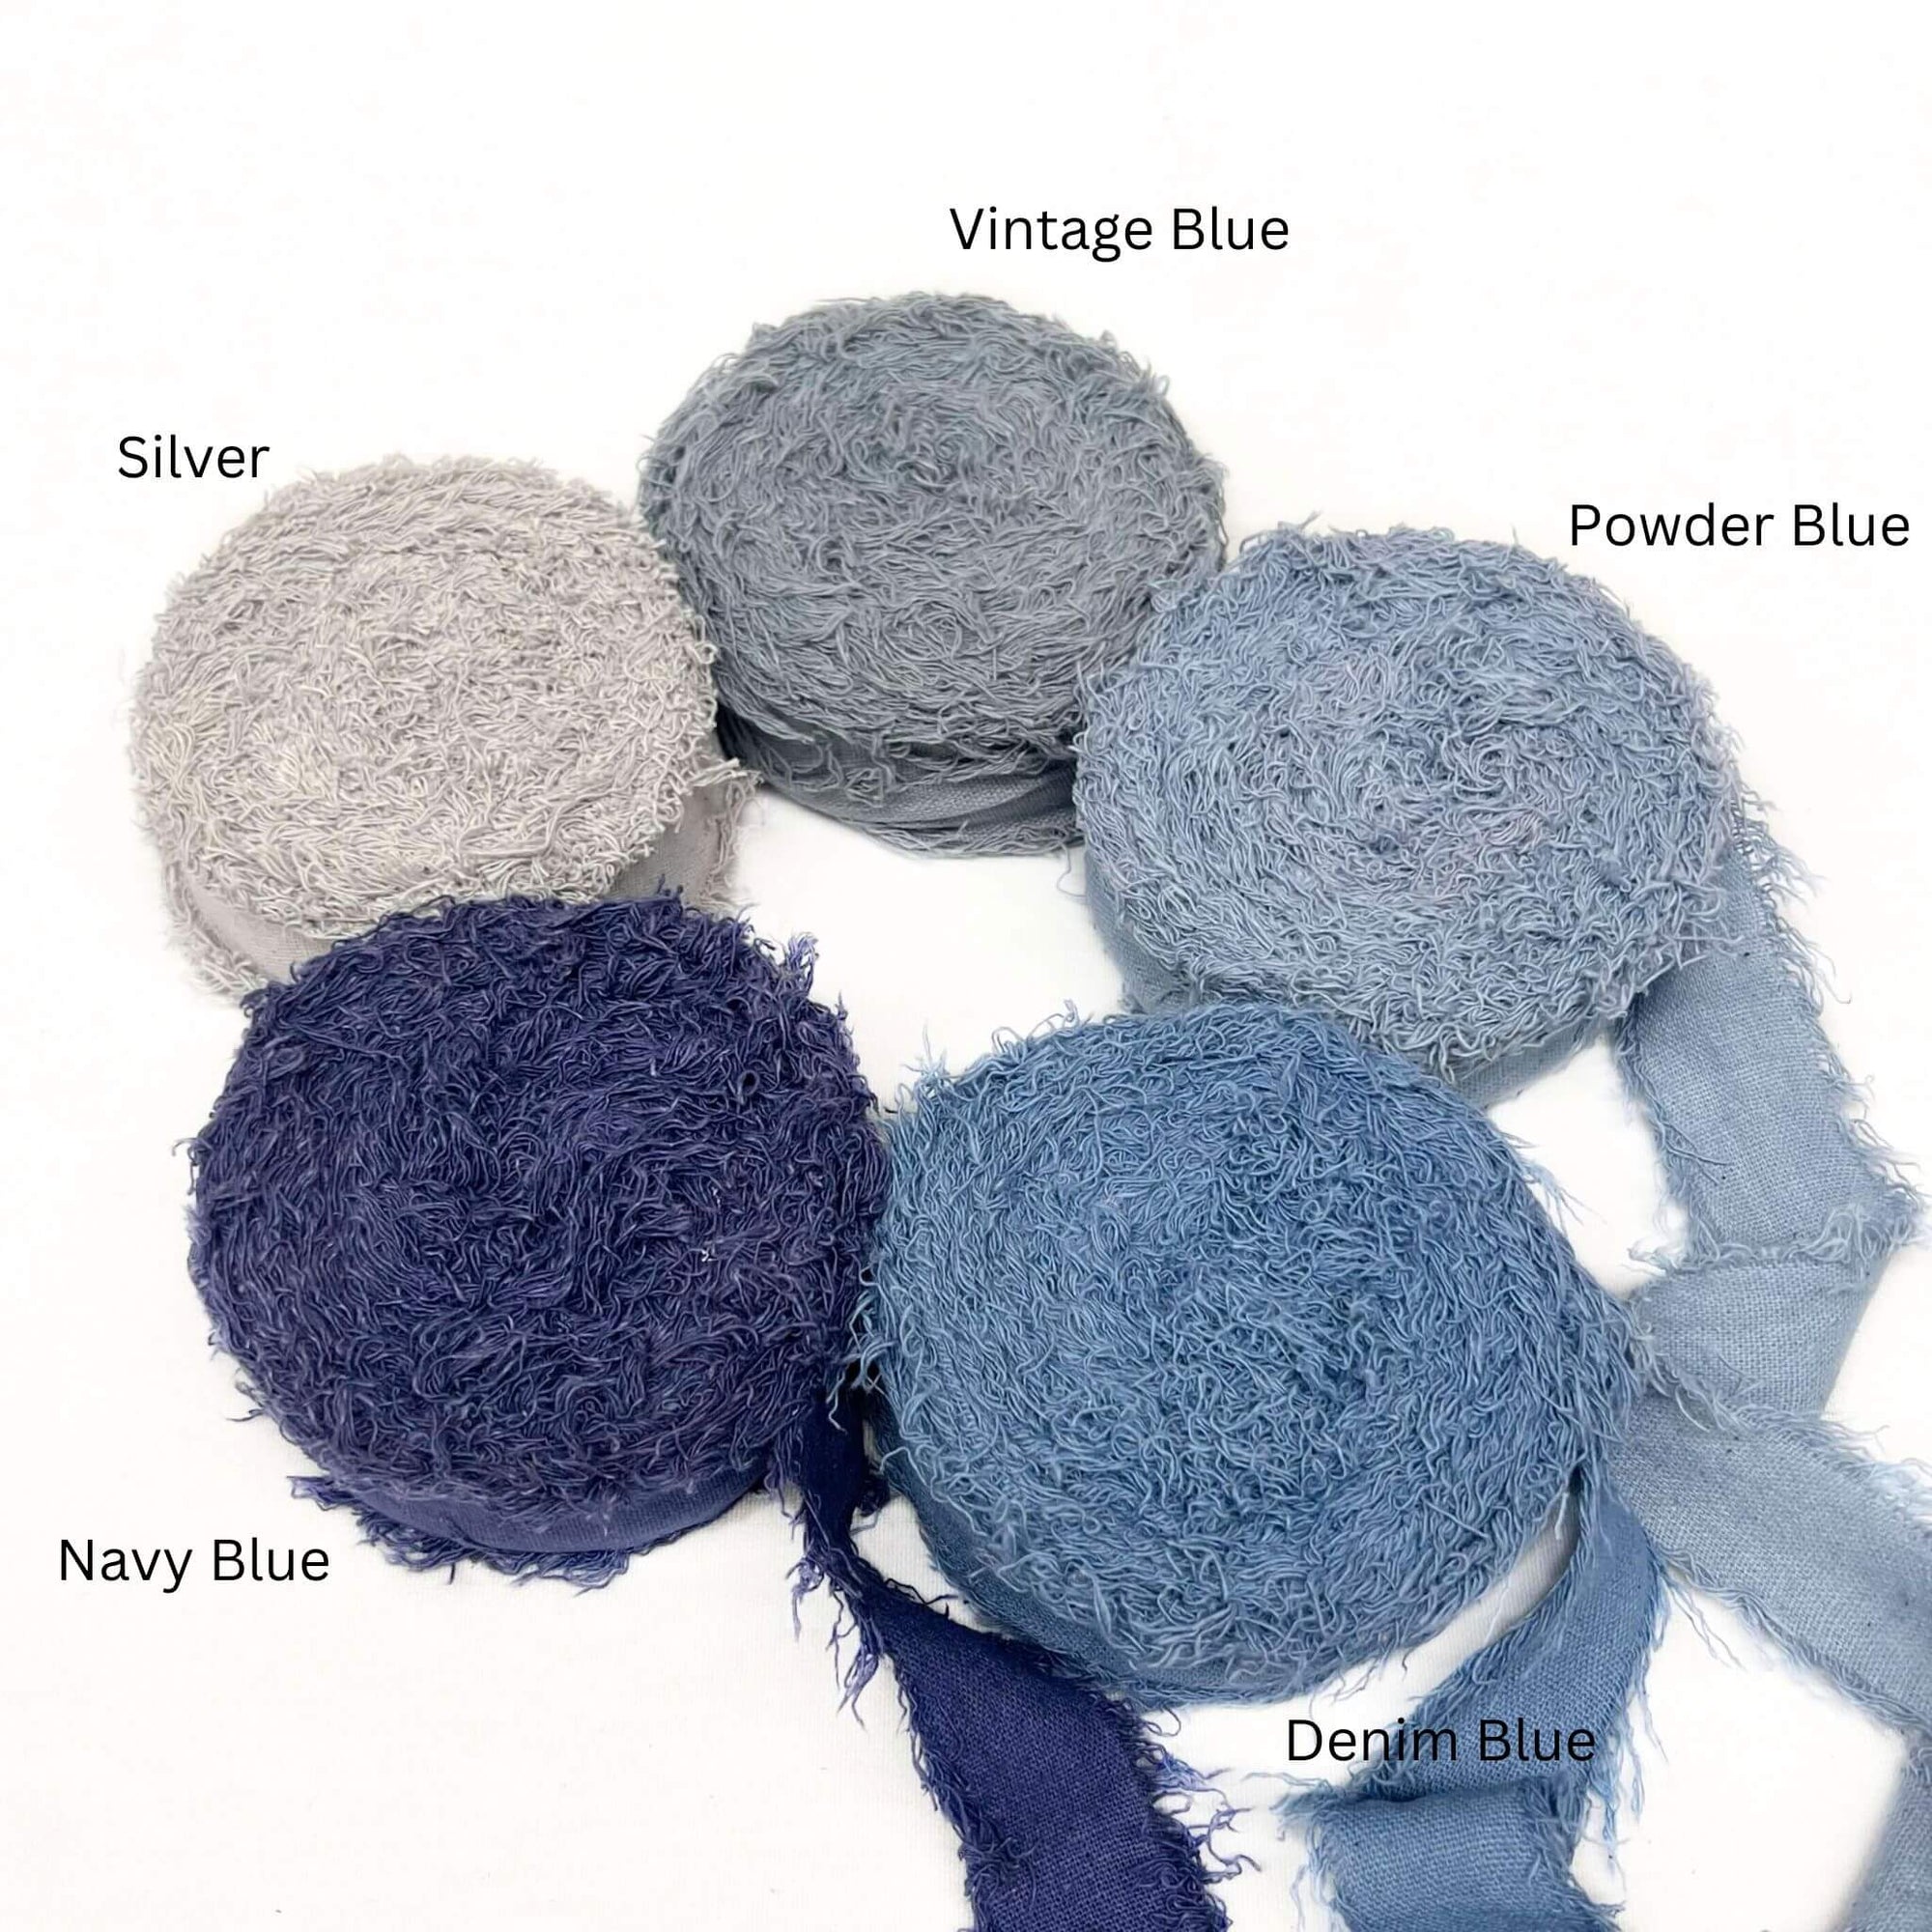 vintage blue powder blue denim blue navy silver grey five rolls of wide frizz ribbon in group photo on white background 